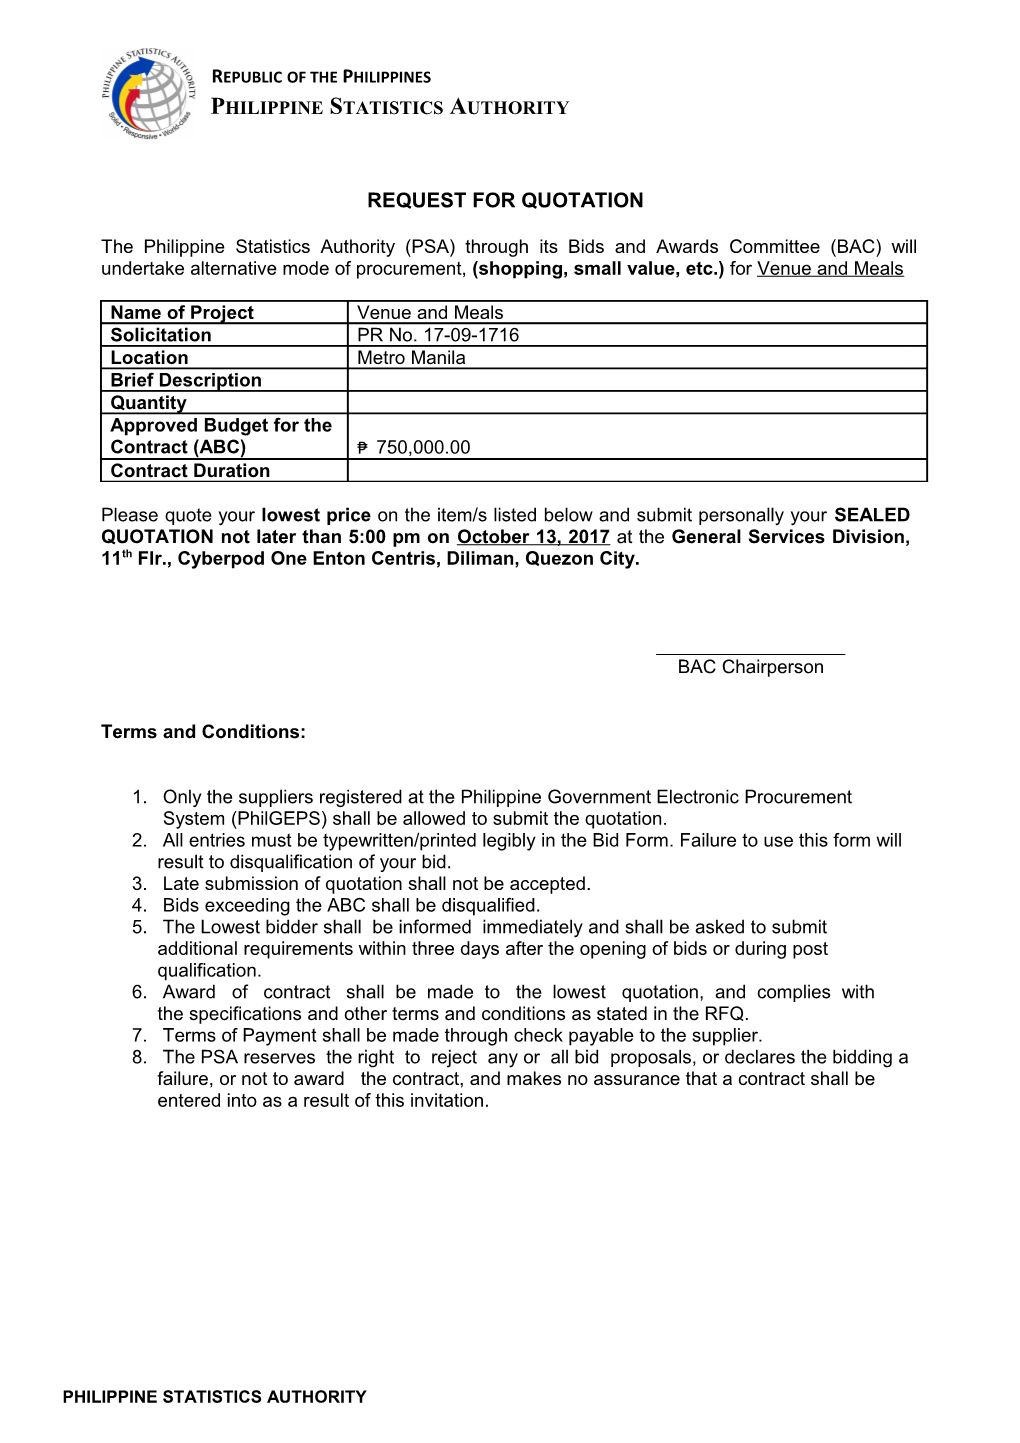 Request for Quotation s34